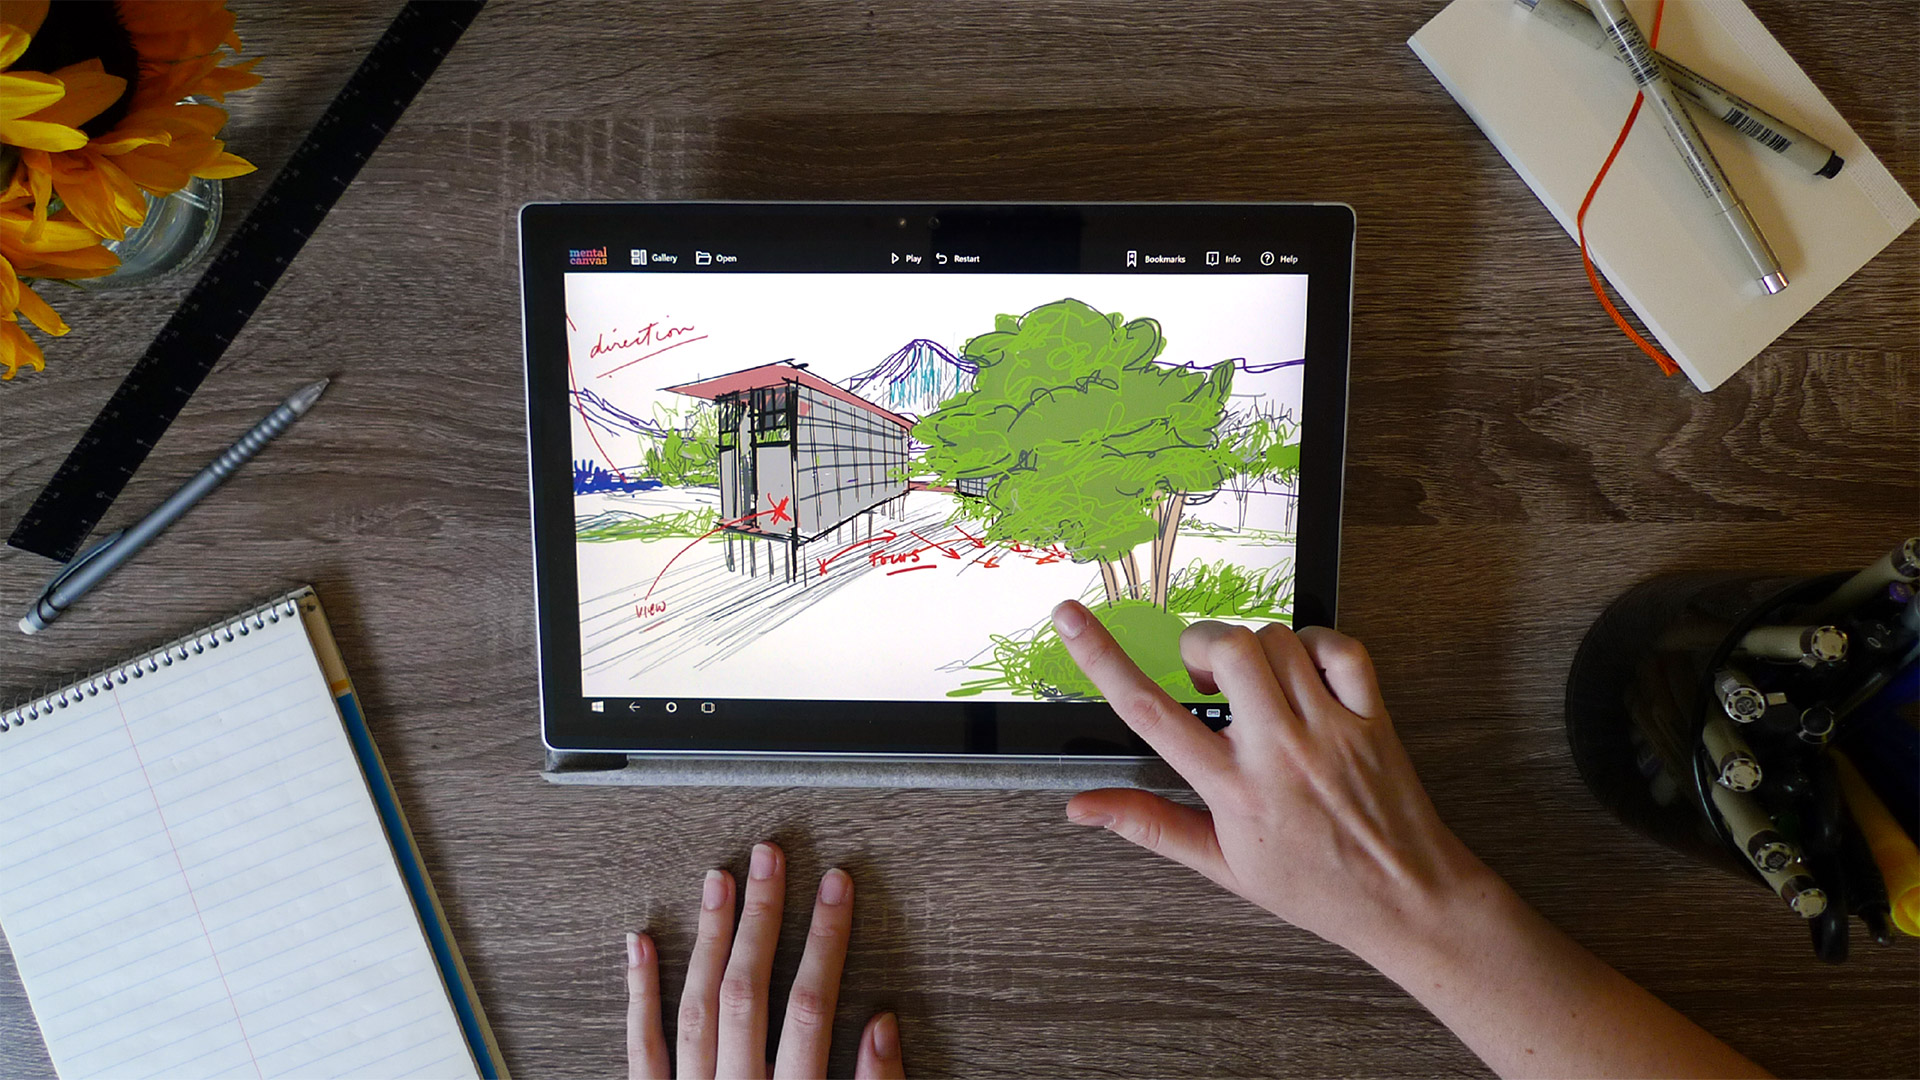 UMake is The Freeform 3D Sketching App You've Always Wanted - SolidSmack